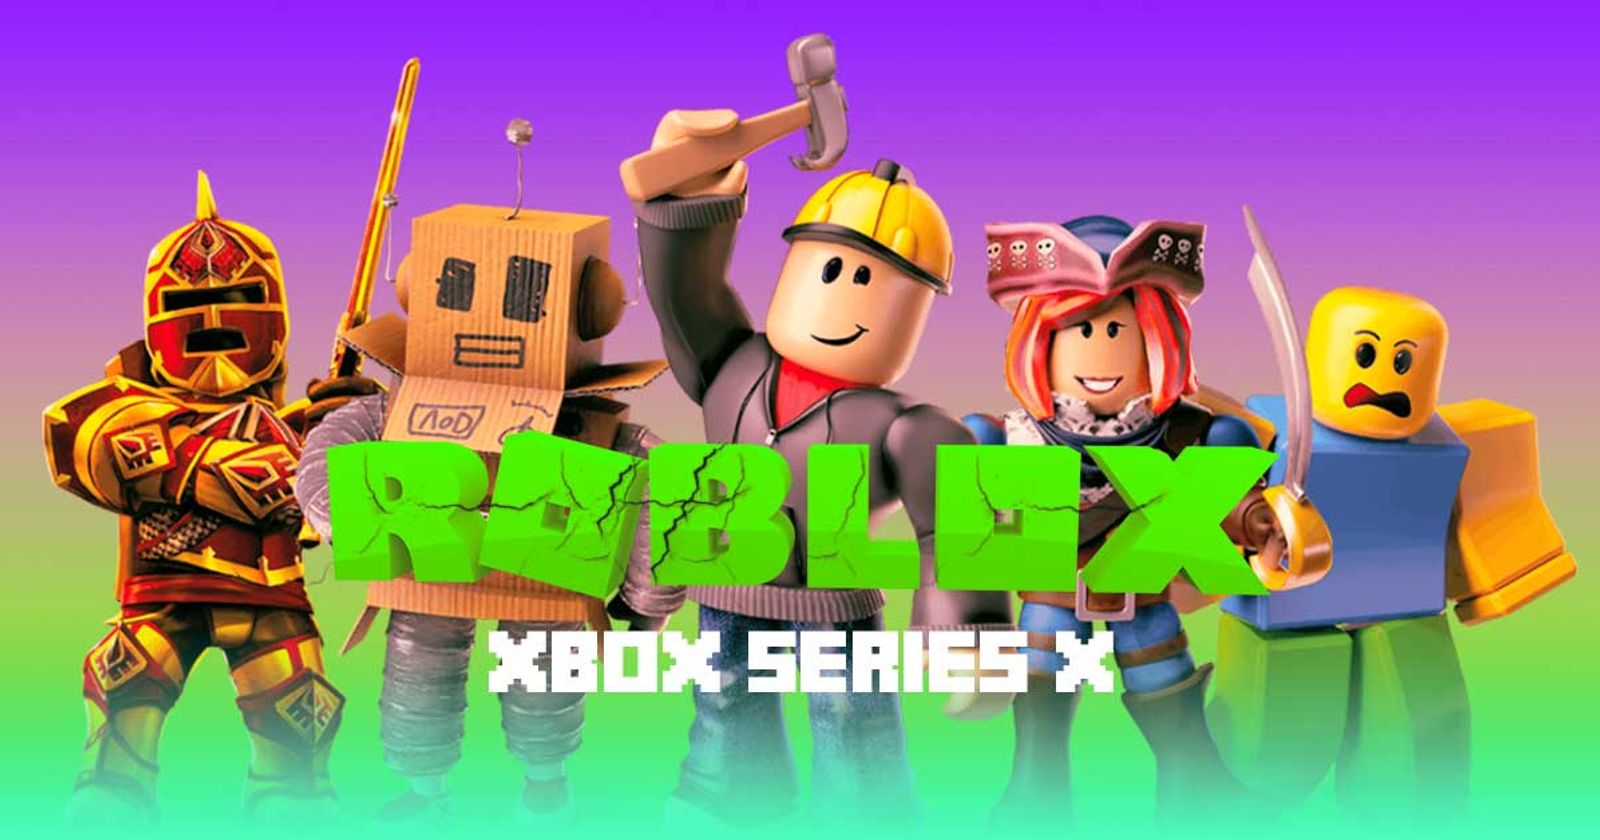 Roblox Xbox Series X Gameplay Review [Free to Play] 